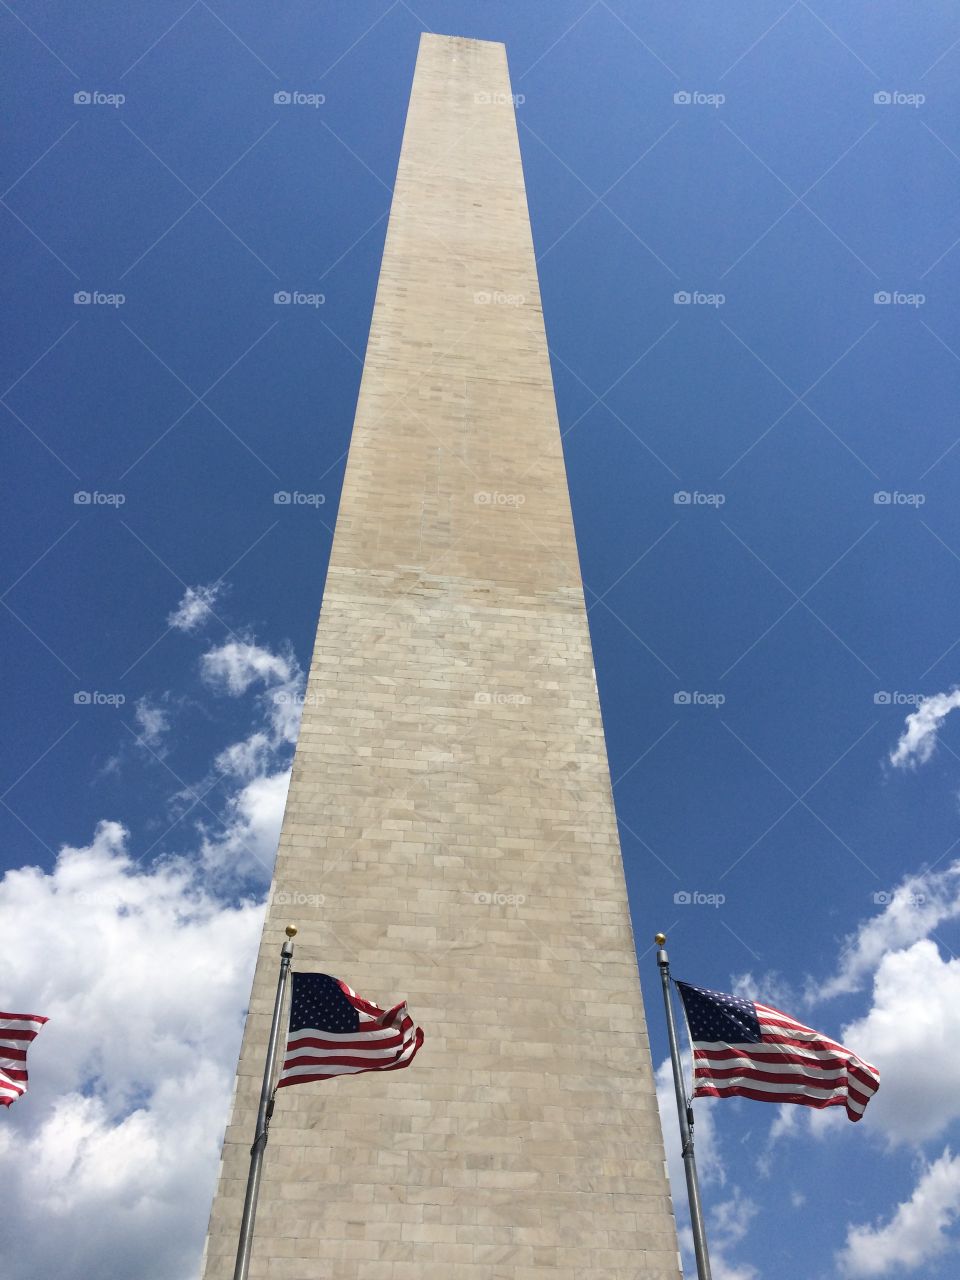 DC's giant pencil . When I was a kid we called the Washington monument the giant pencil. 